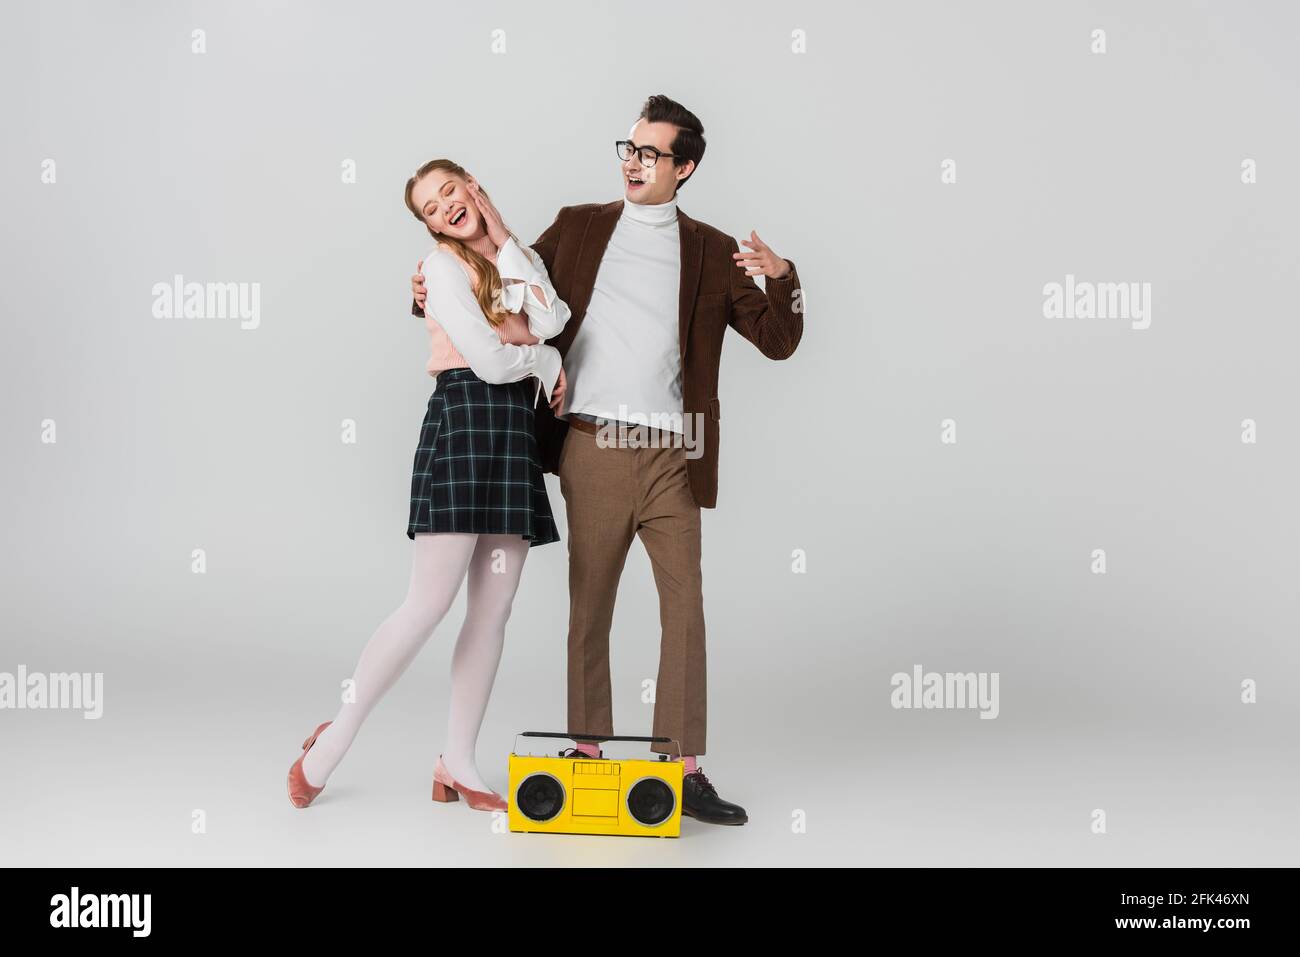 smiling man embracing excited woman near vintage boombox on grey Stock Photo